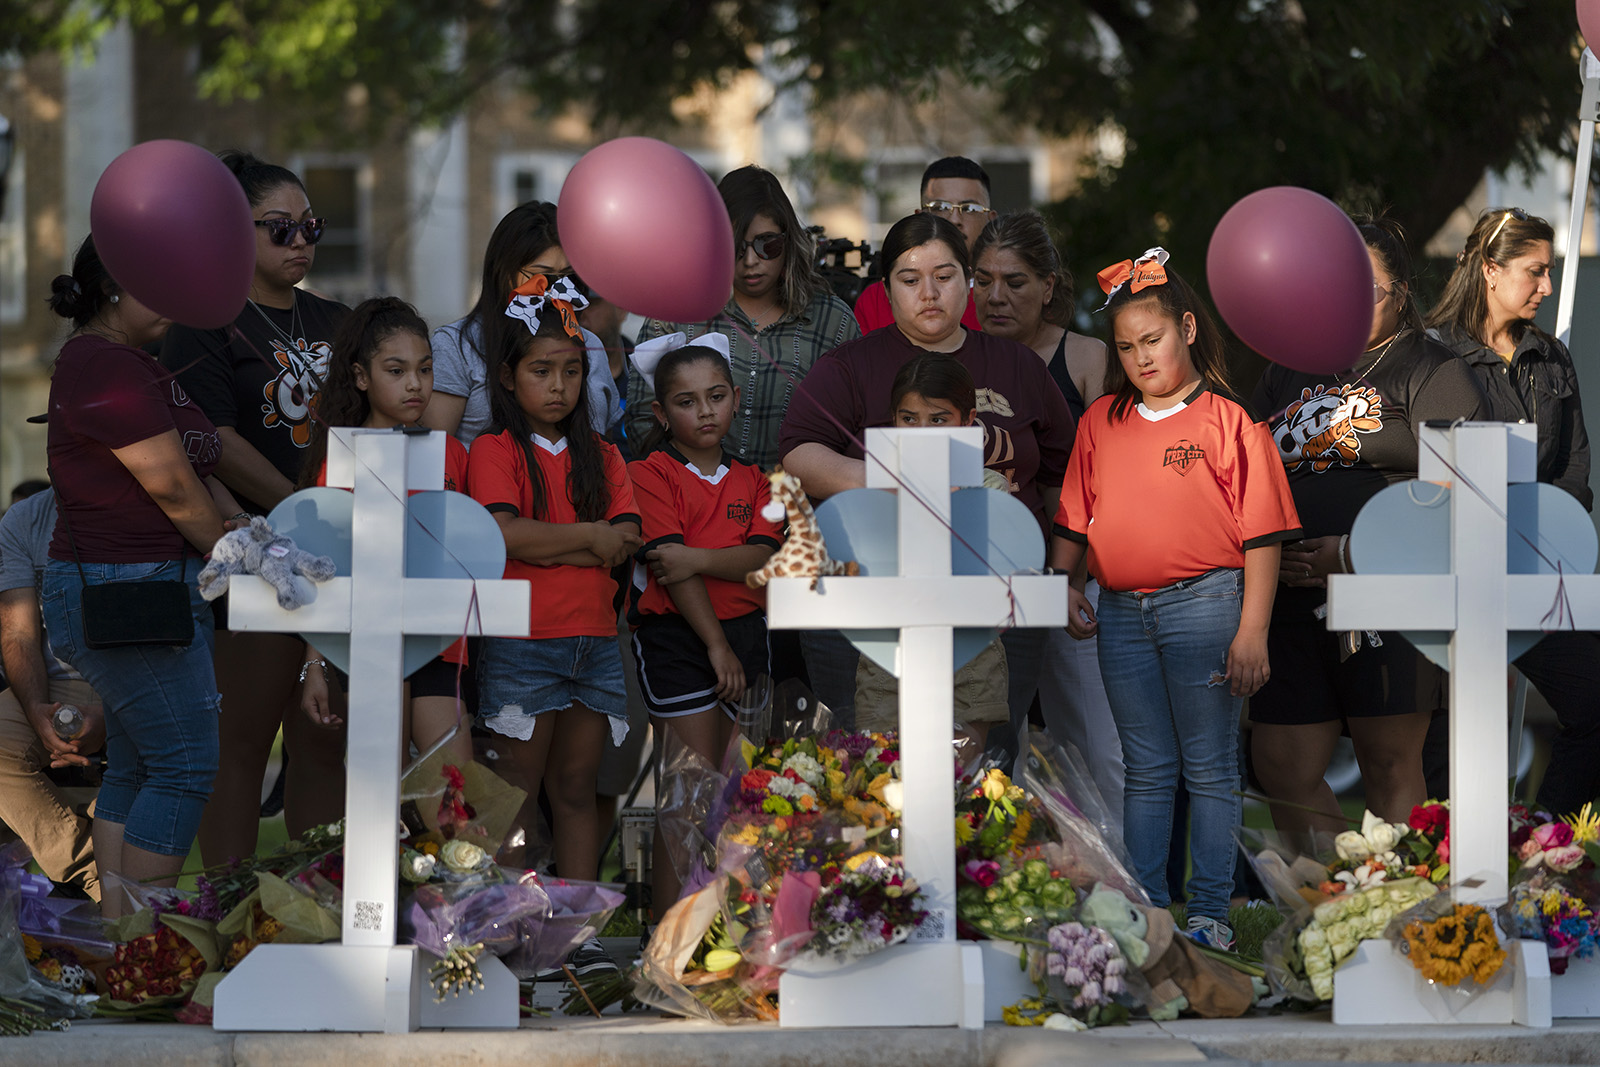 People gather at a memorial site to pay their respects for the victims killed in this week's elementary school shooting in Uvalde, Texas, Thursday, May 26, 2022. (AP Photo/Jae C. Hong)